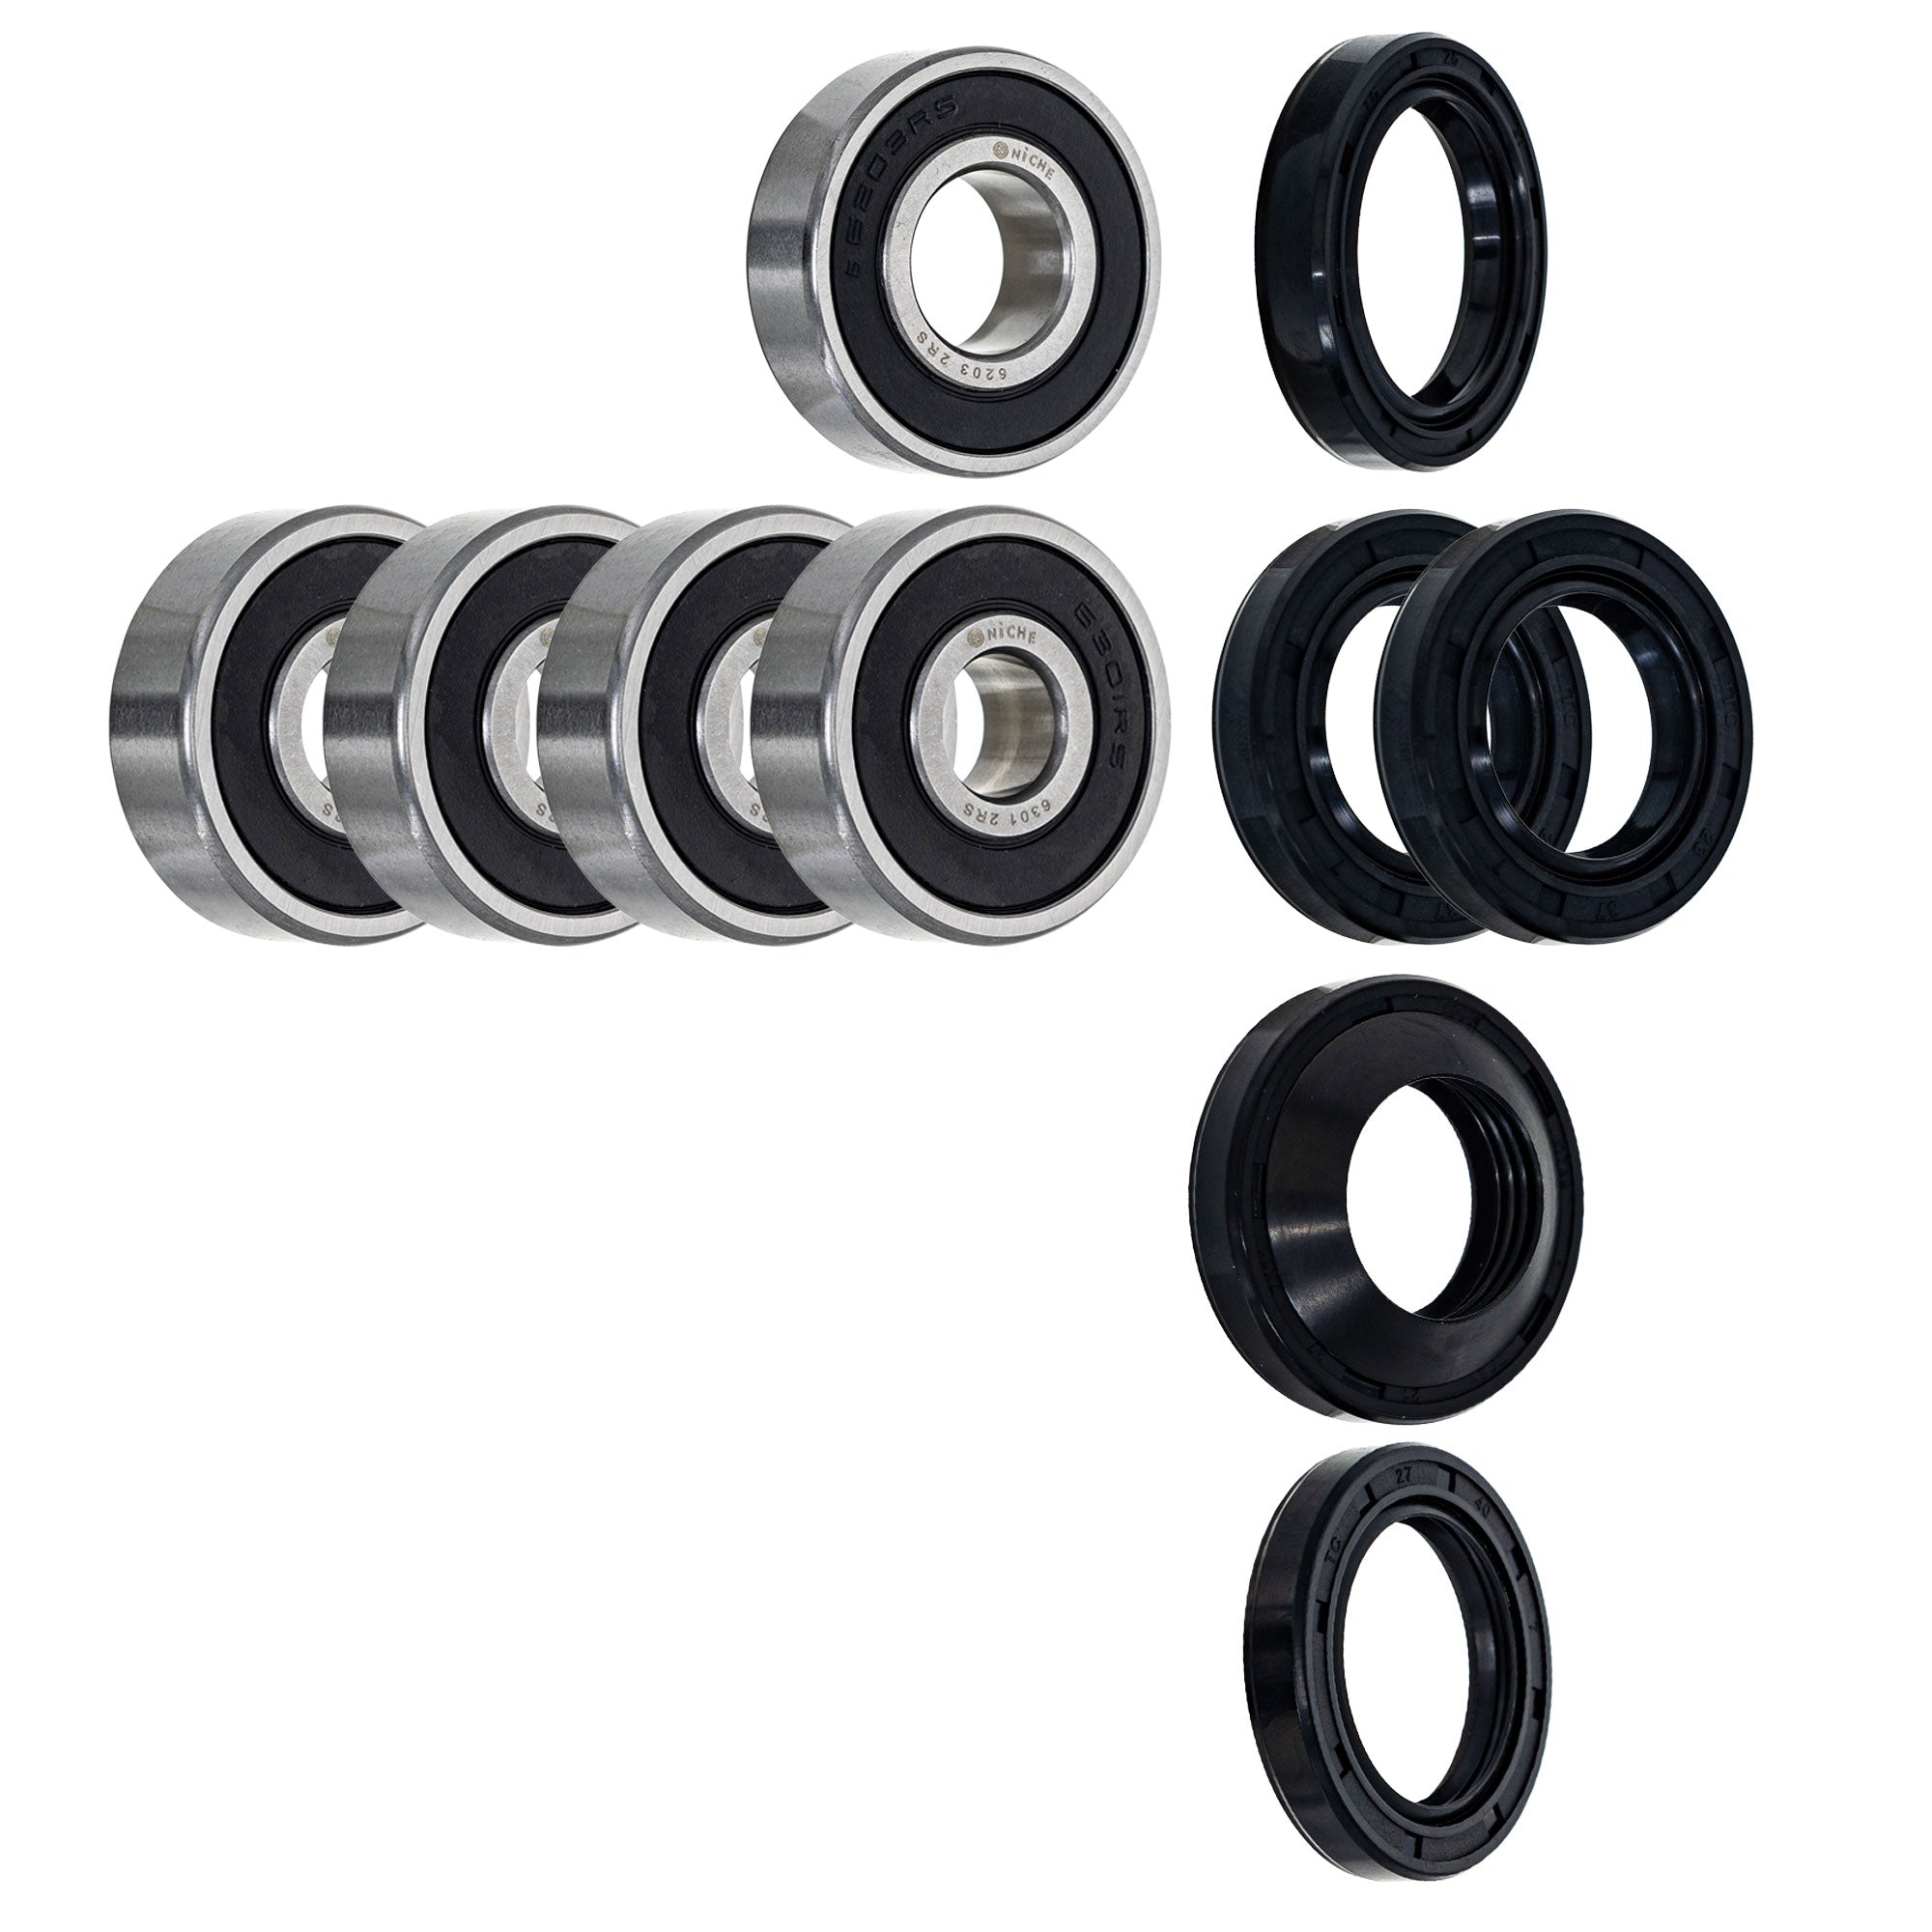 Wheel Bearing Seal Kit for zOTHER Ref No Grom NICHE MK1008477